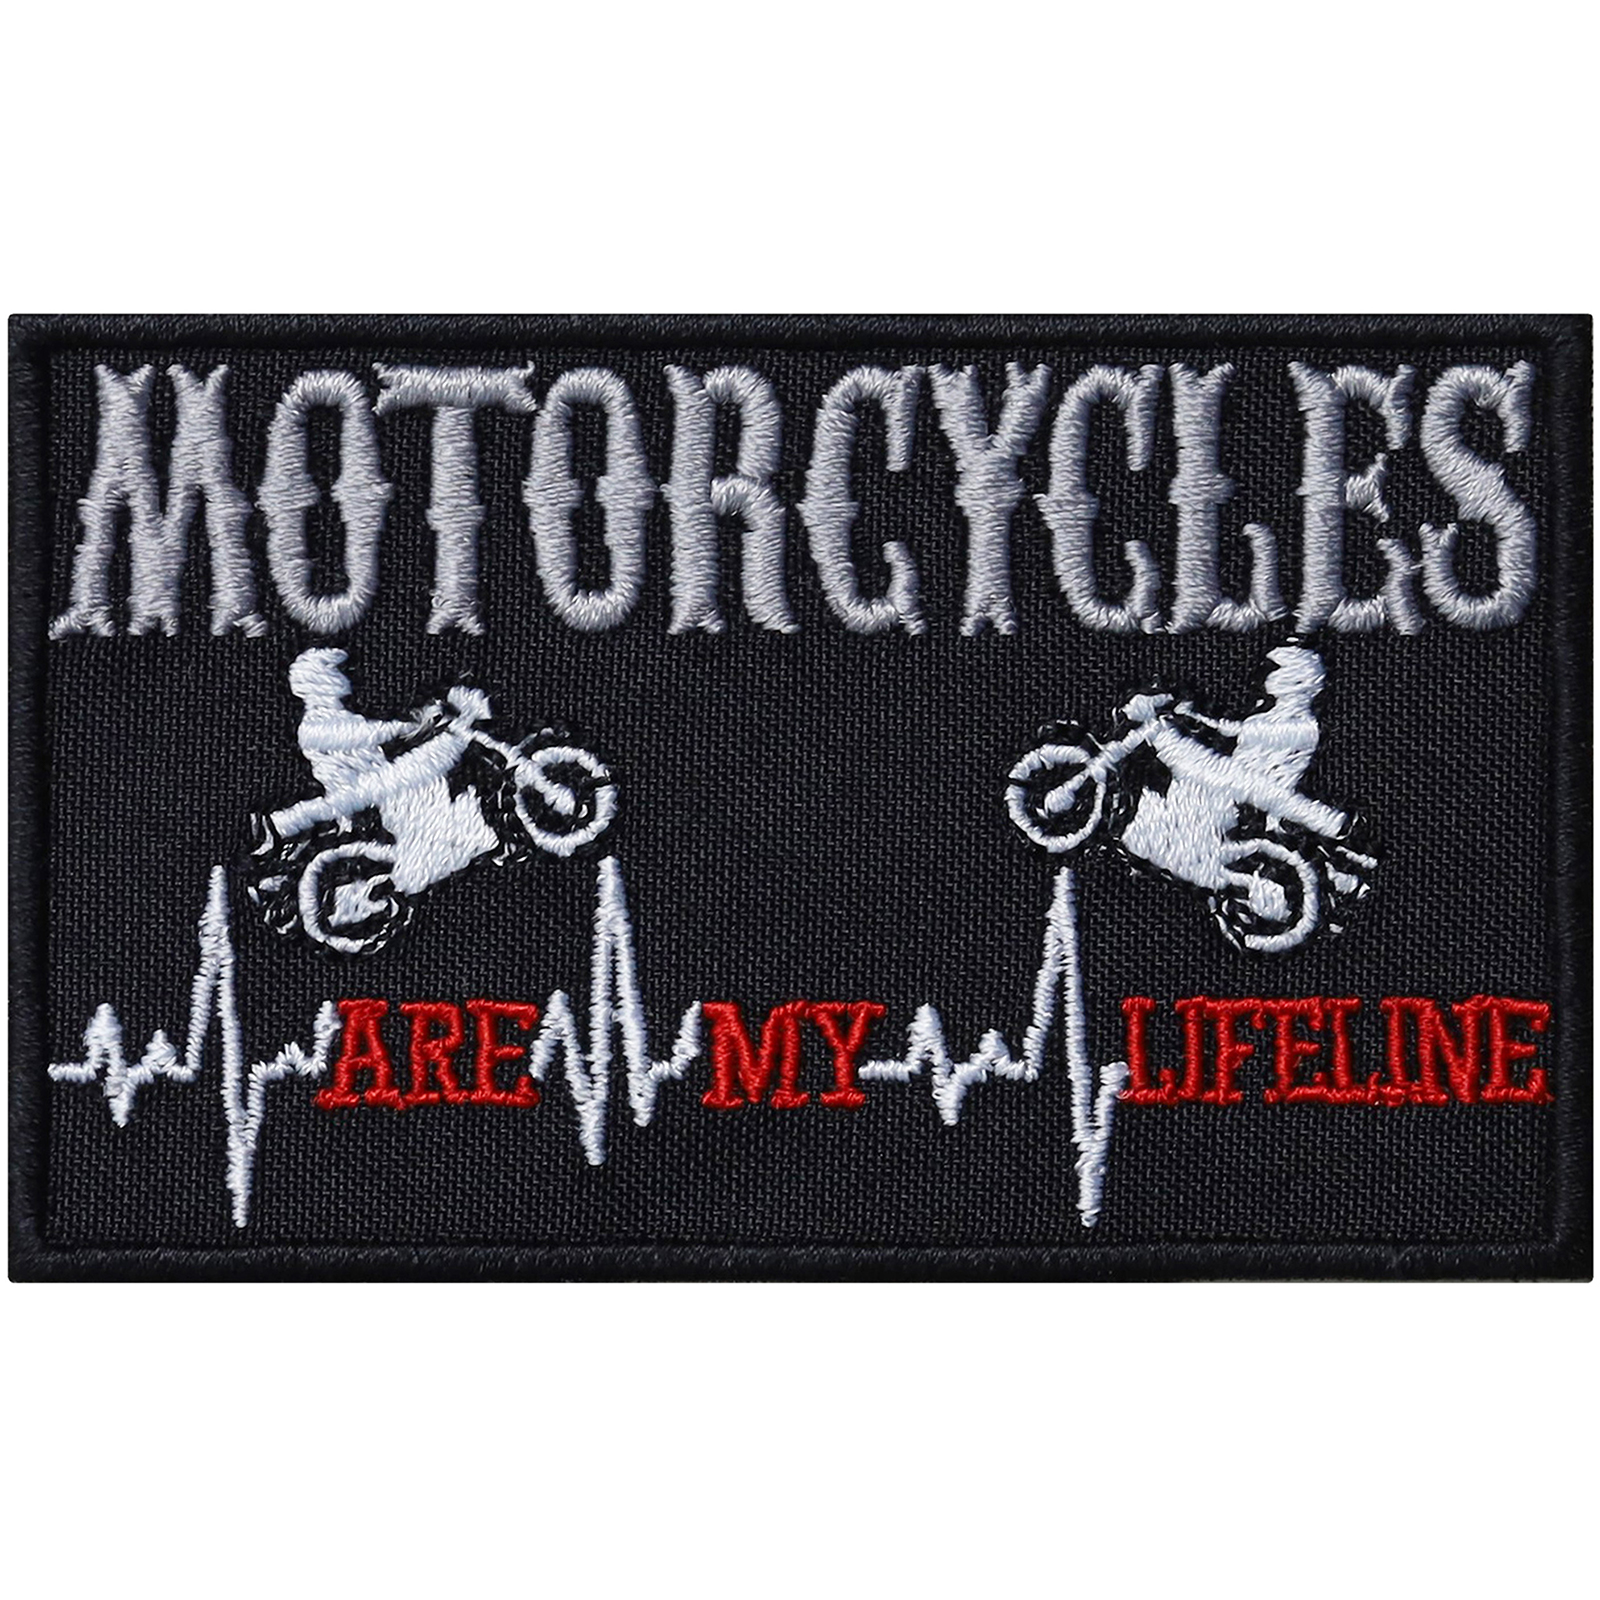 Motorcycles are my lifeline - Patch